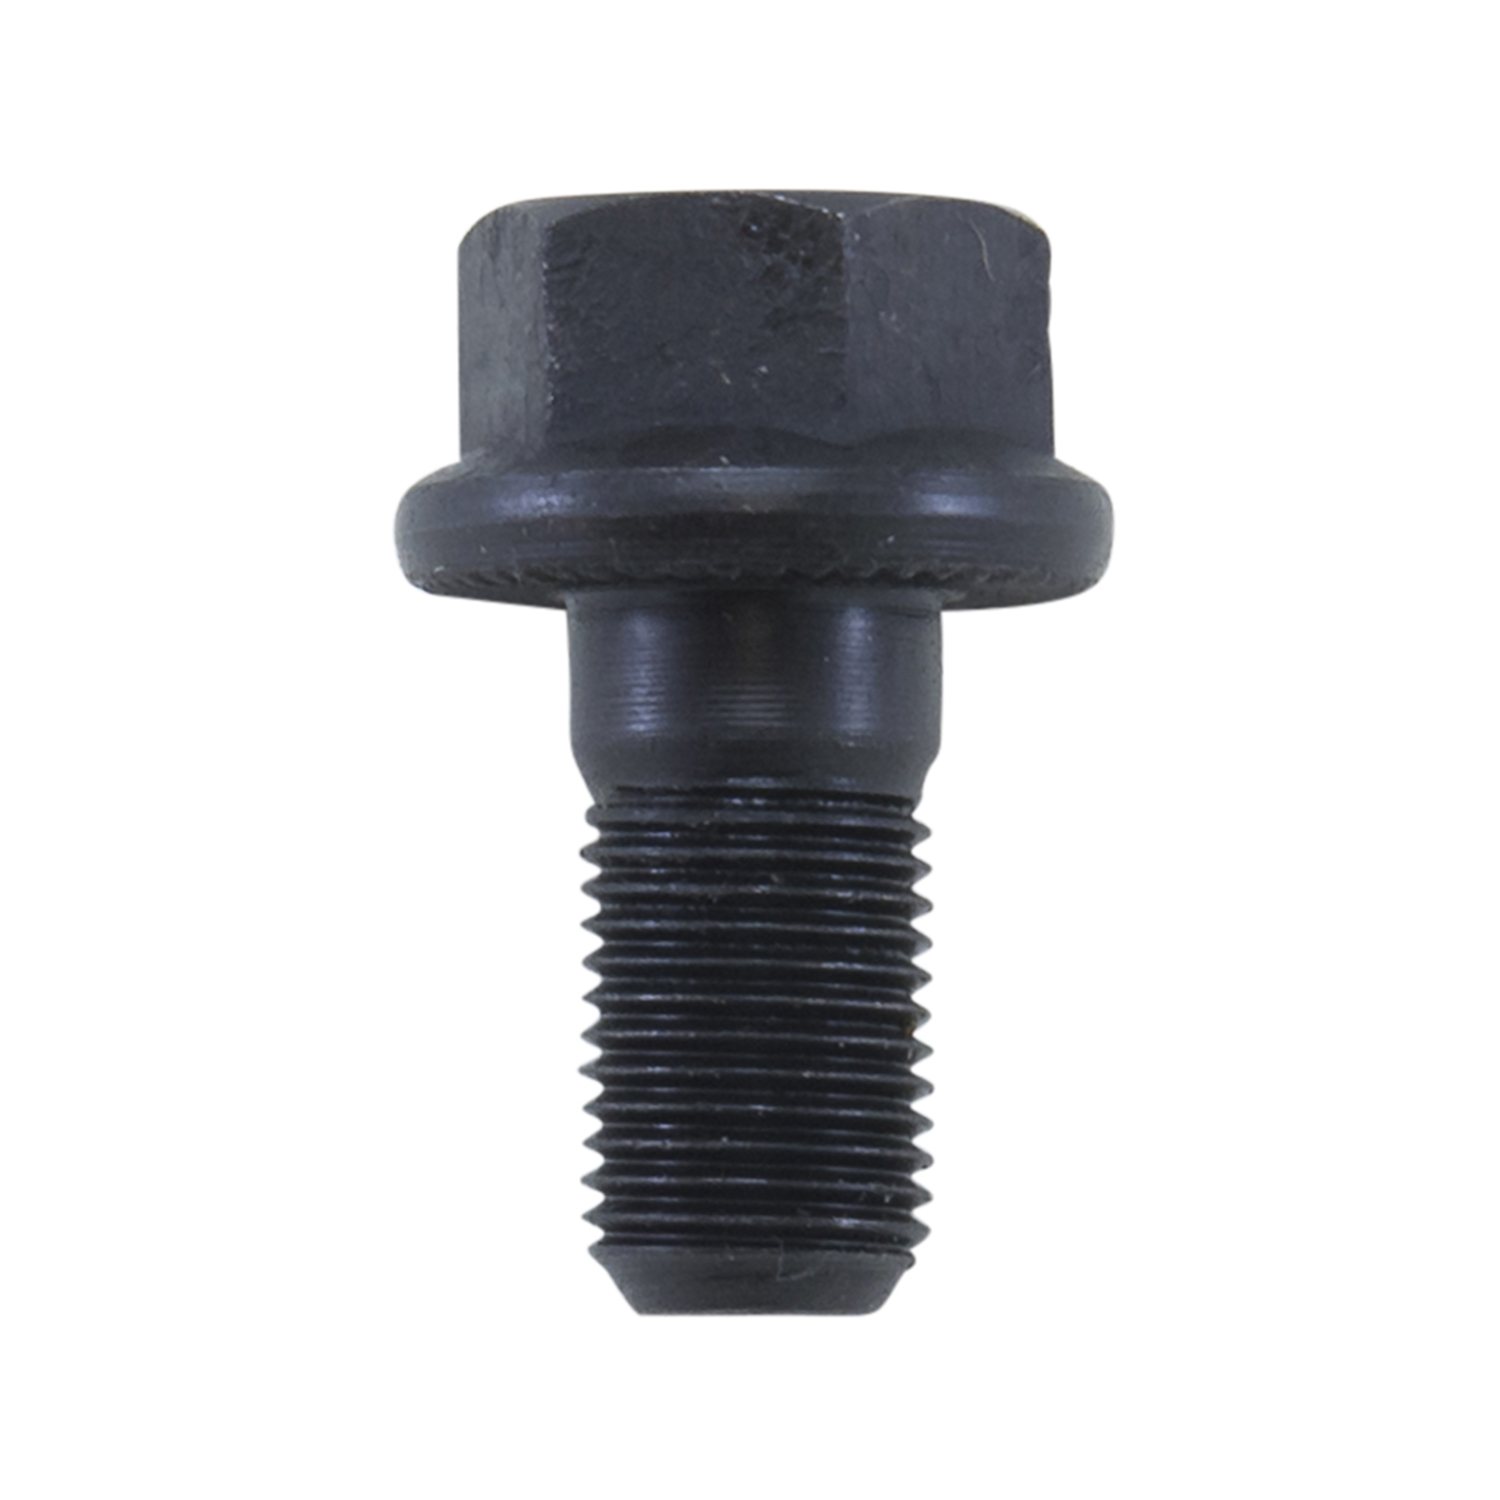 10.5" AAM & 11.5" AAM Dodge Ring Gear Bolt, Right Hand Thread, M14 x 1.480" Long